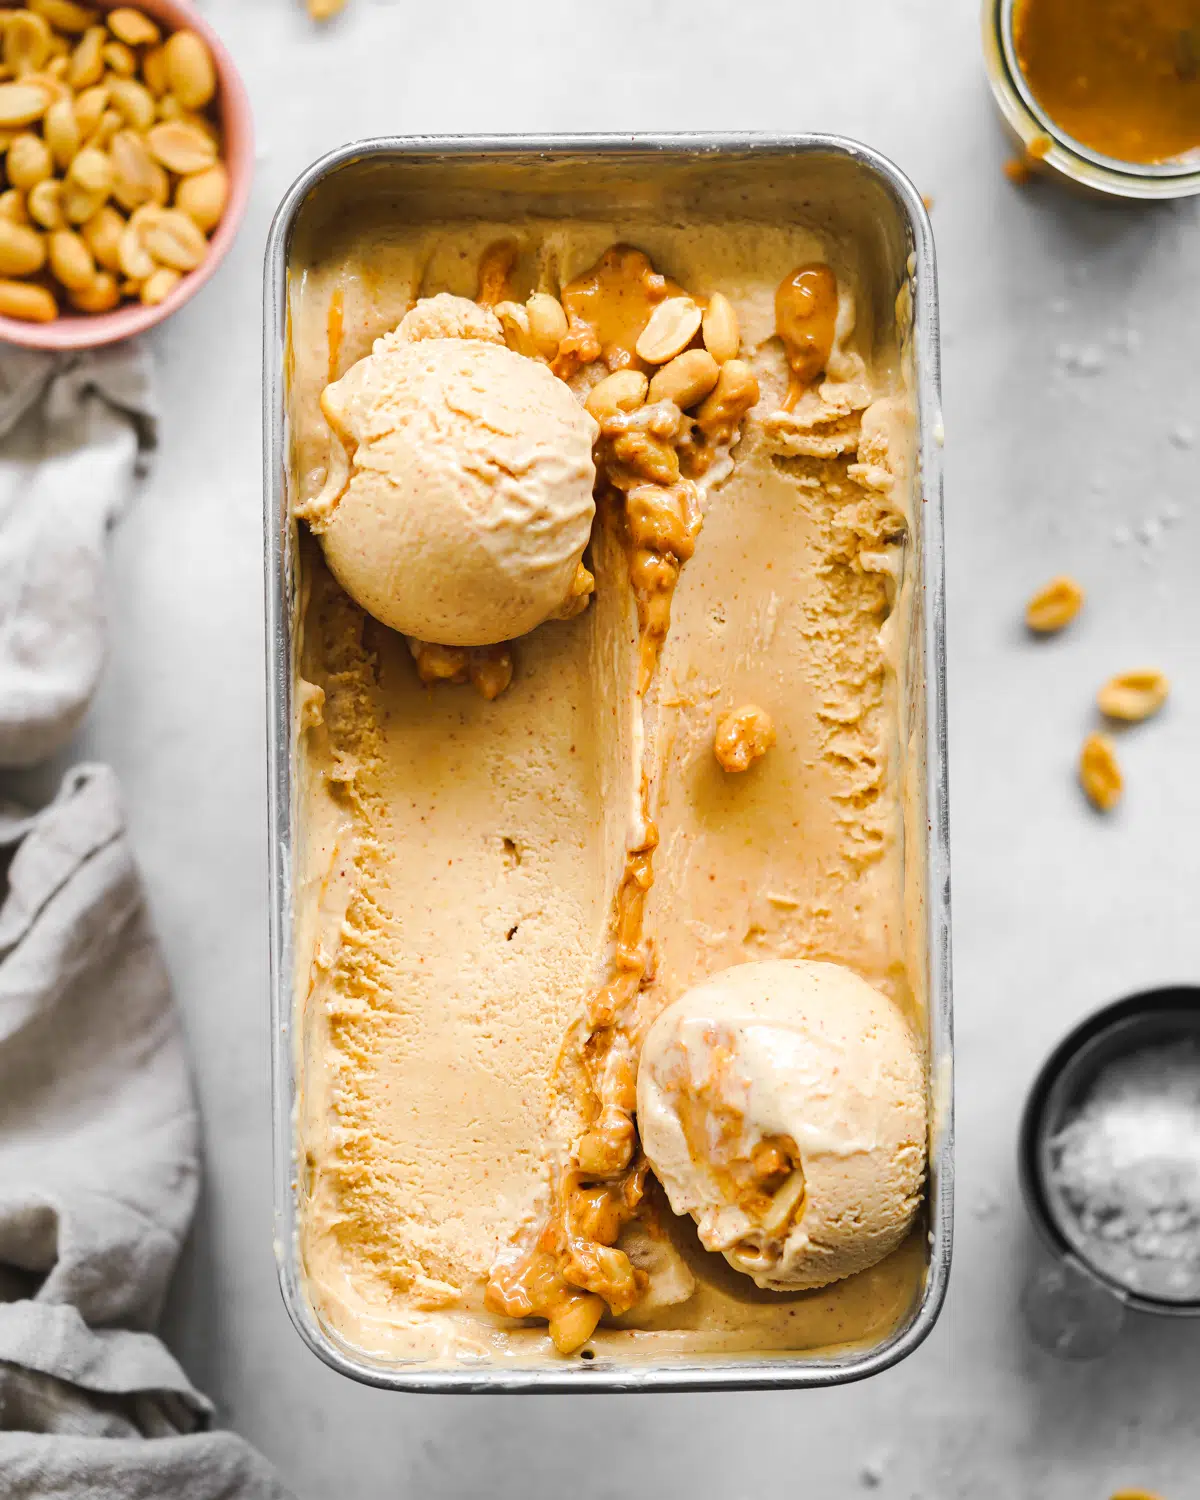 peanut butter ice cream in a loaf pan with roasted peanuts scattered around it.